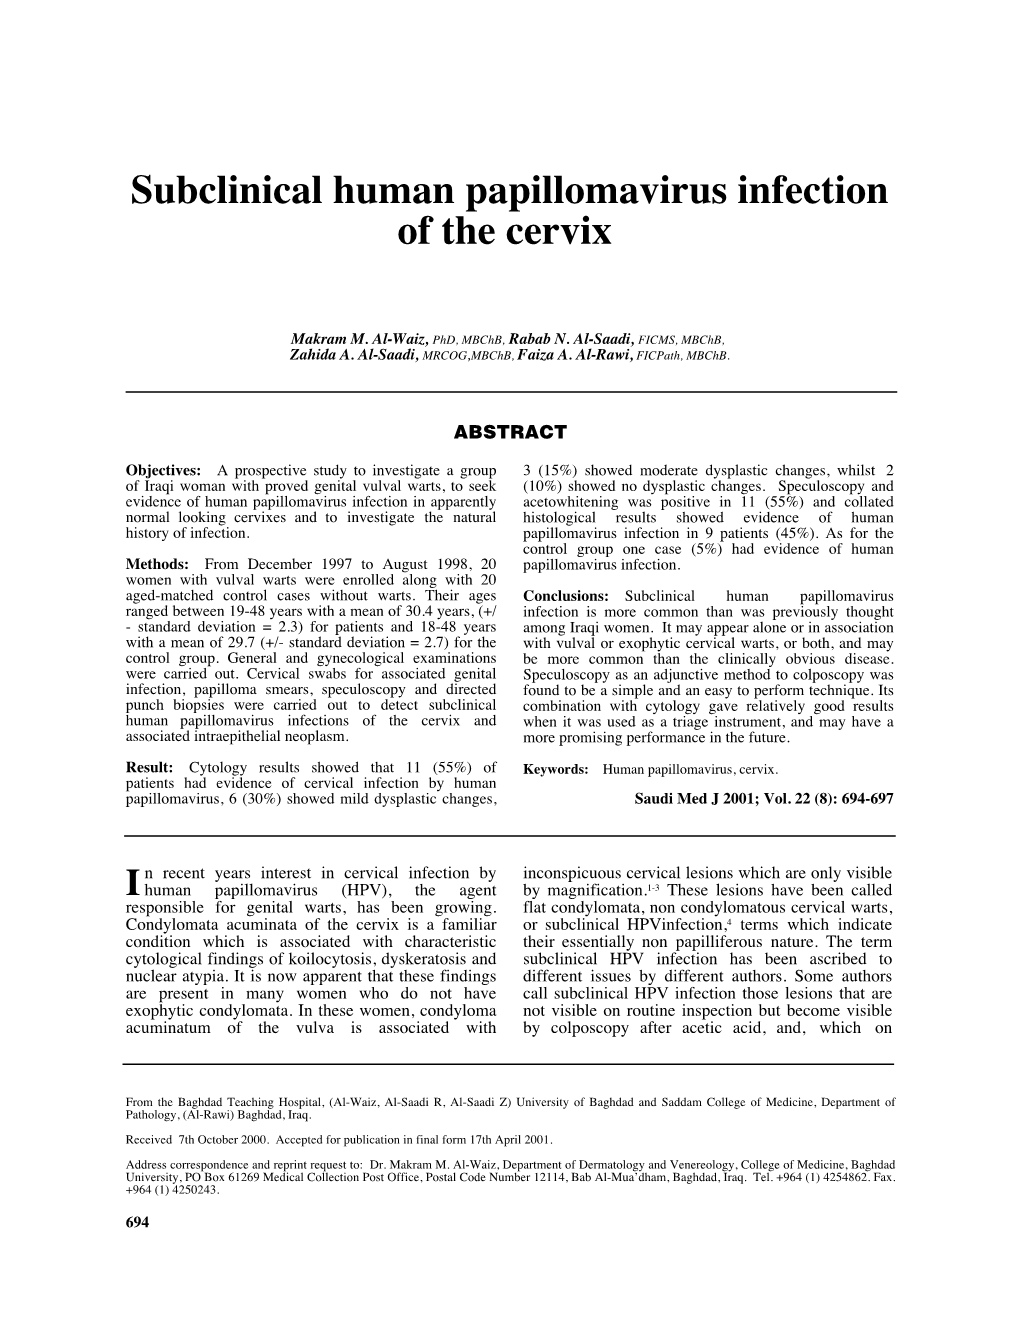 Subclinical Human Papillomavirus Infection of the Cervix